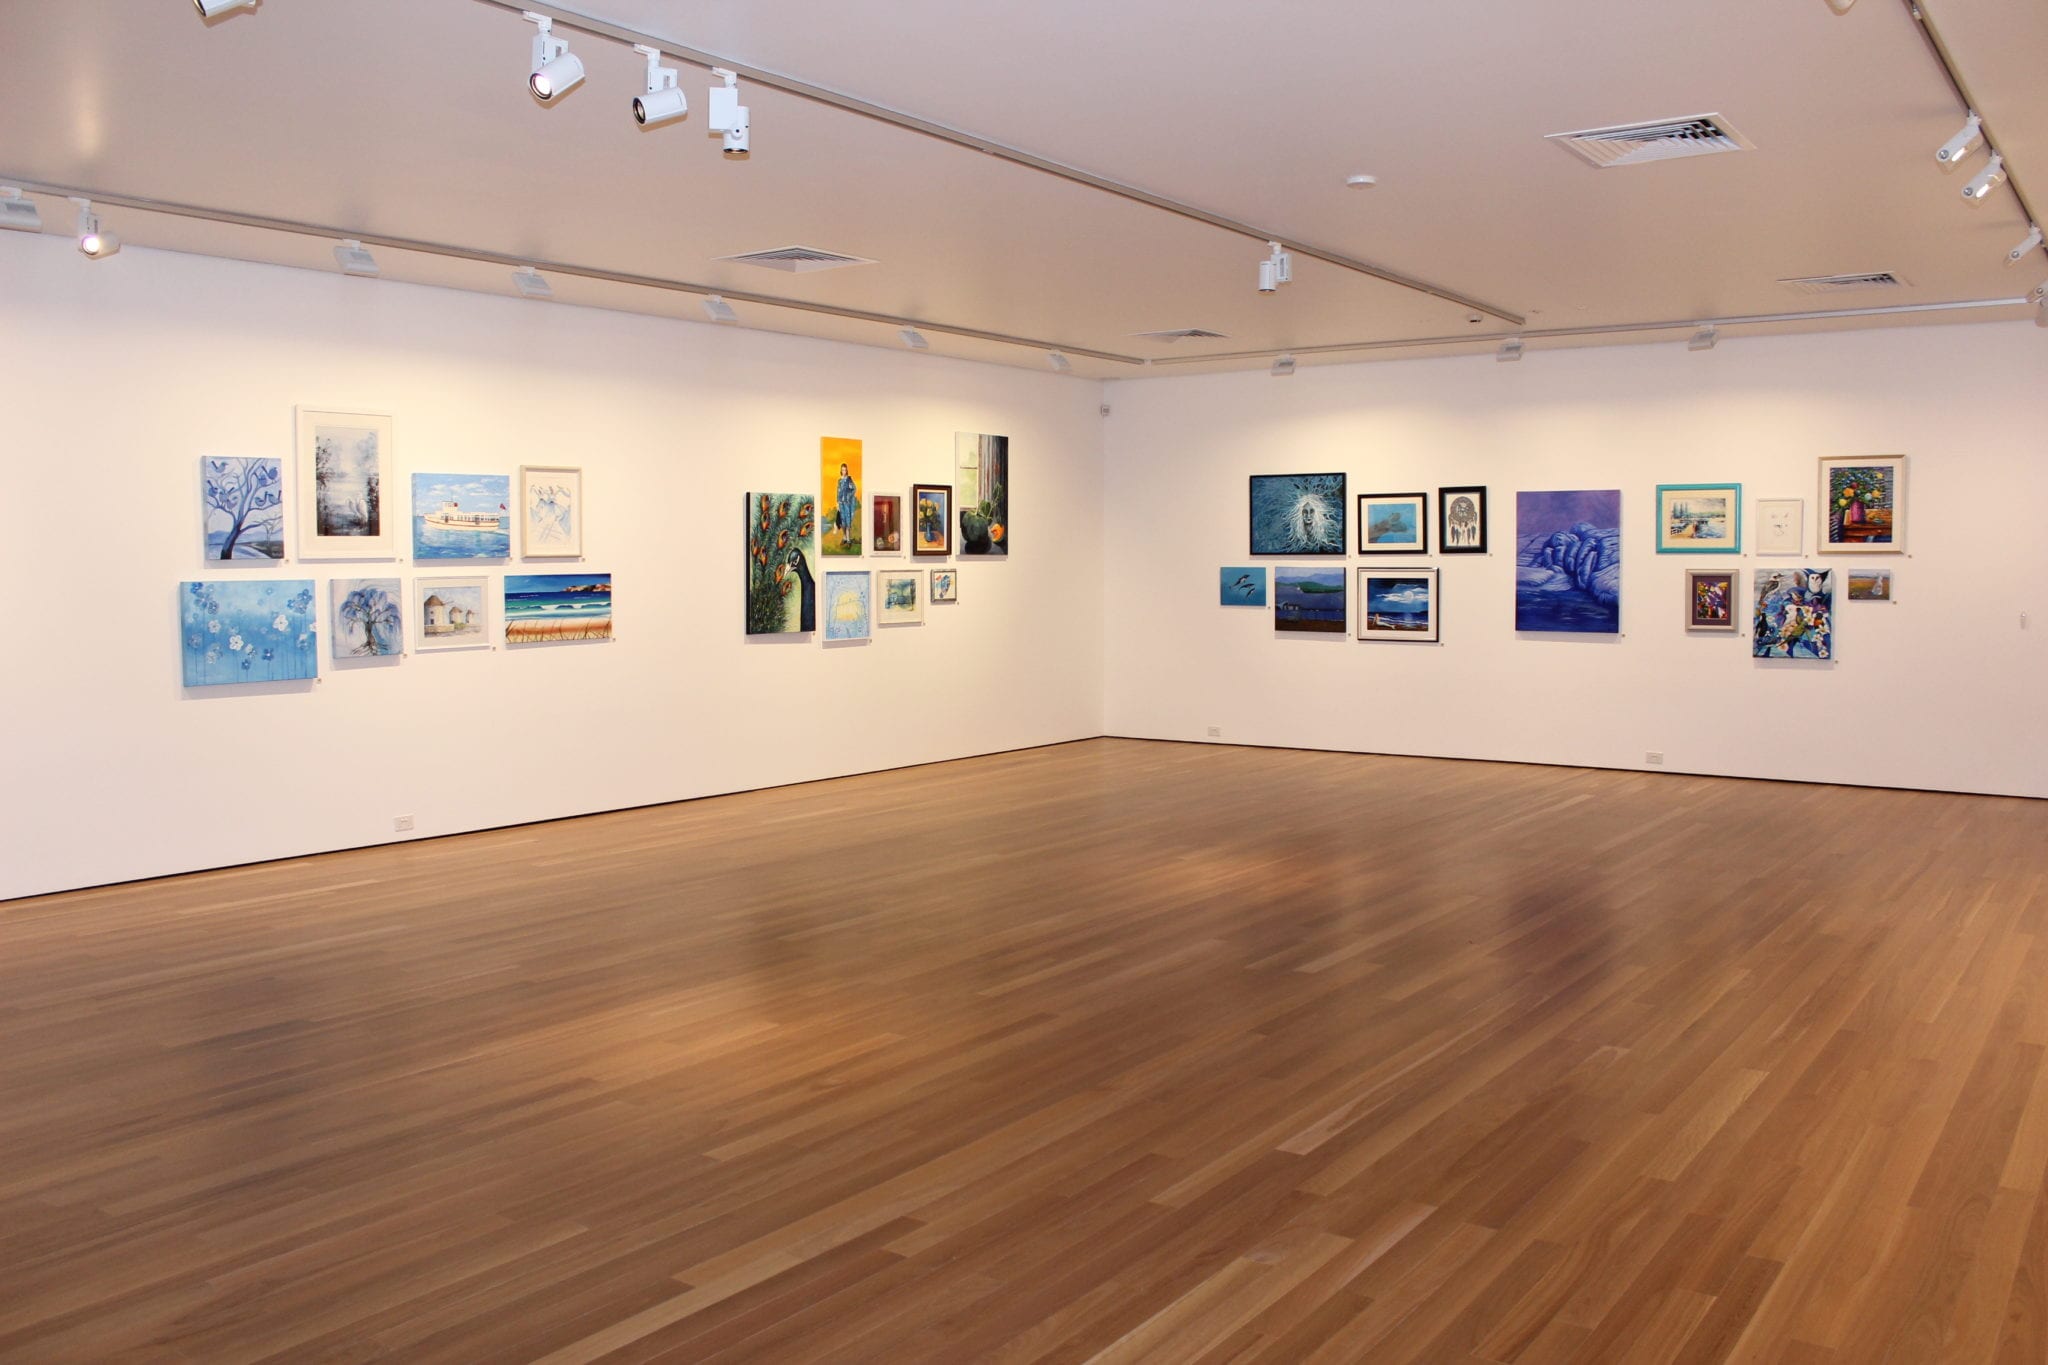 Exhibition documentation of Blue by Latrobe City Art Groups, 16 March to 18 April 2019, Gallery 6, Latrobe Regional Gallery.